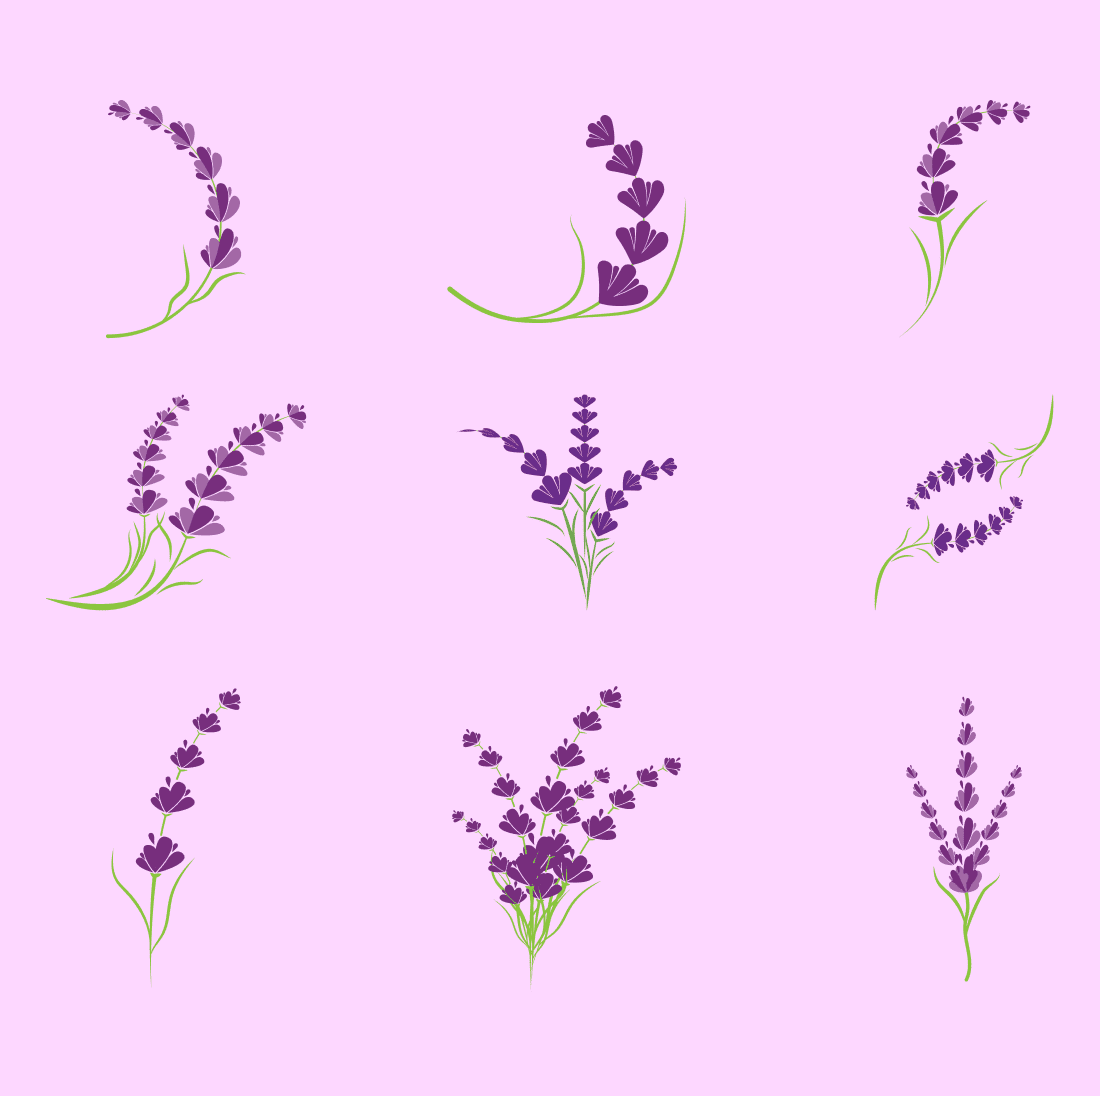 Violet sprigs of lavender are drawn on a light pink background.